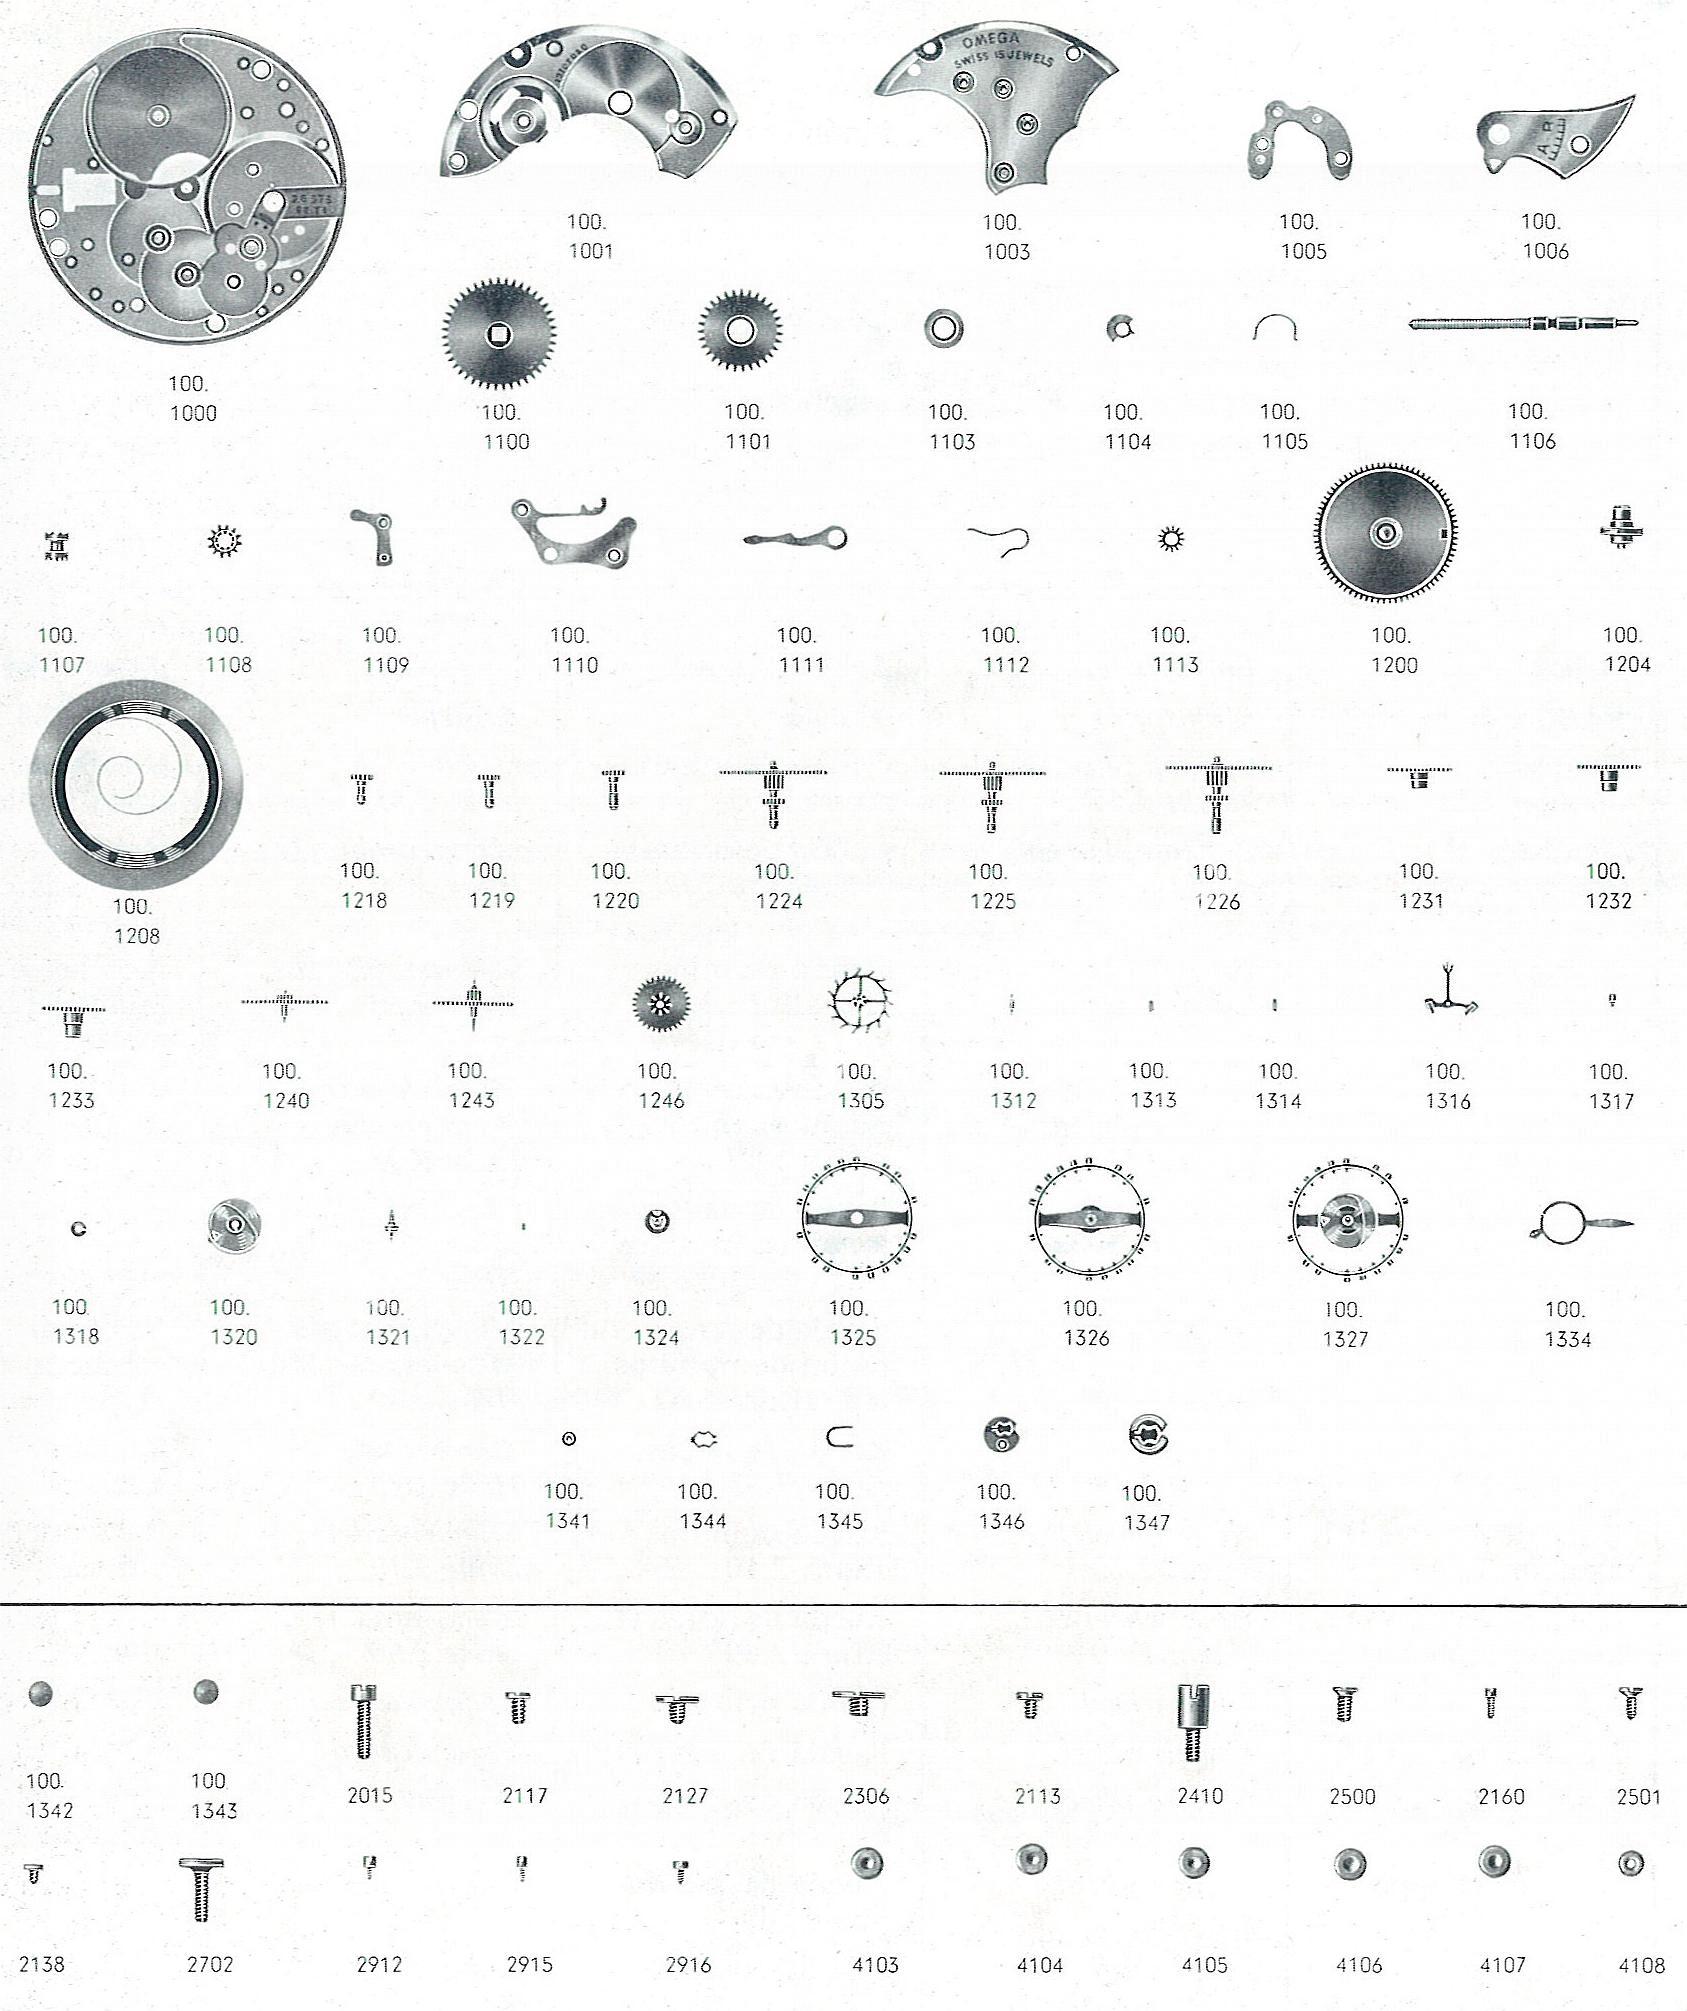 Omega 100 watch parts